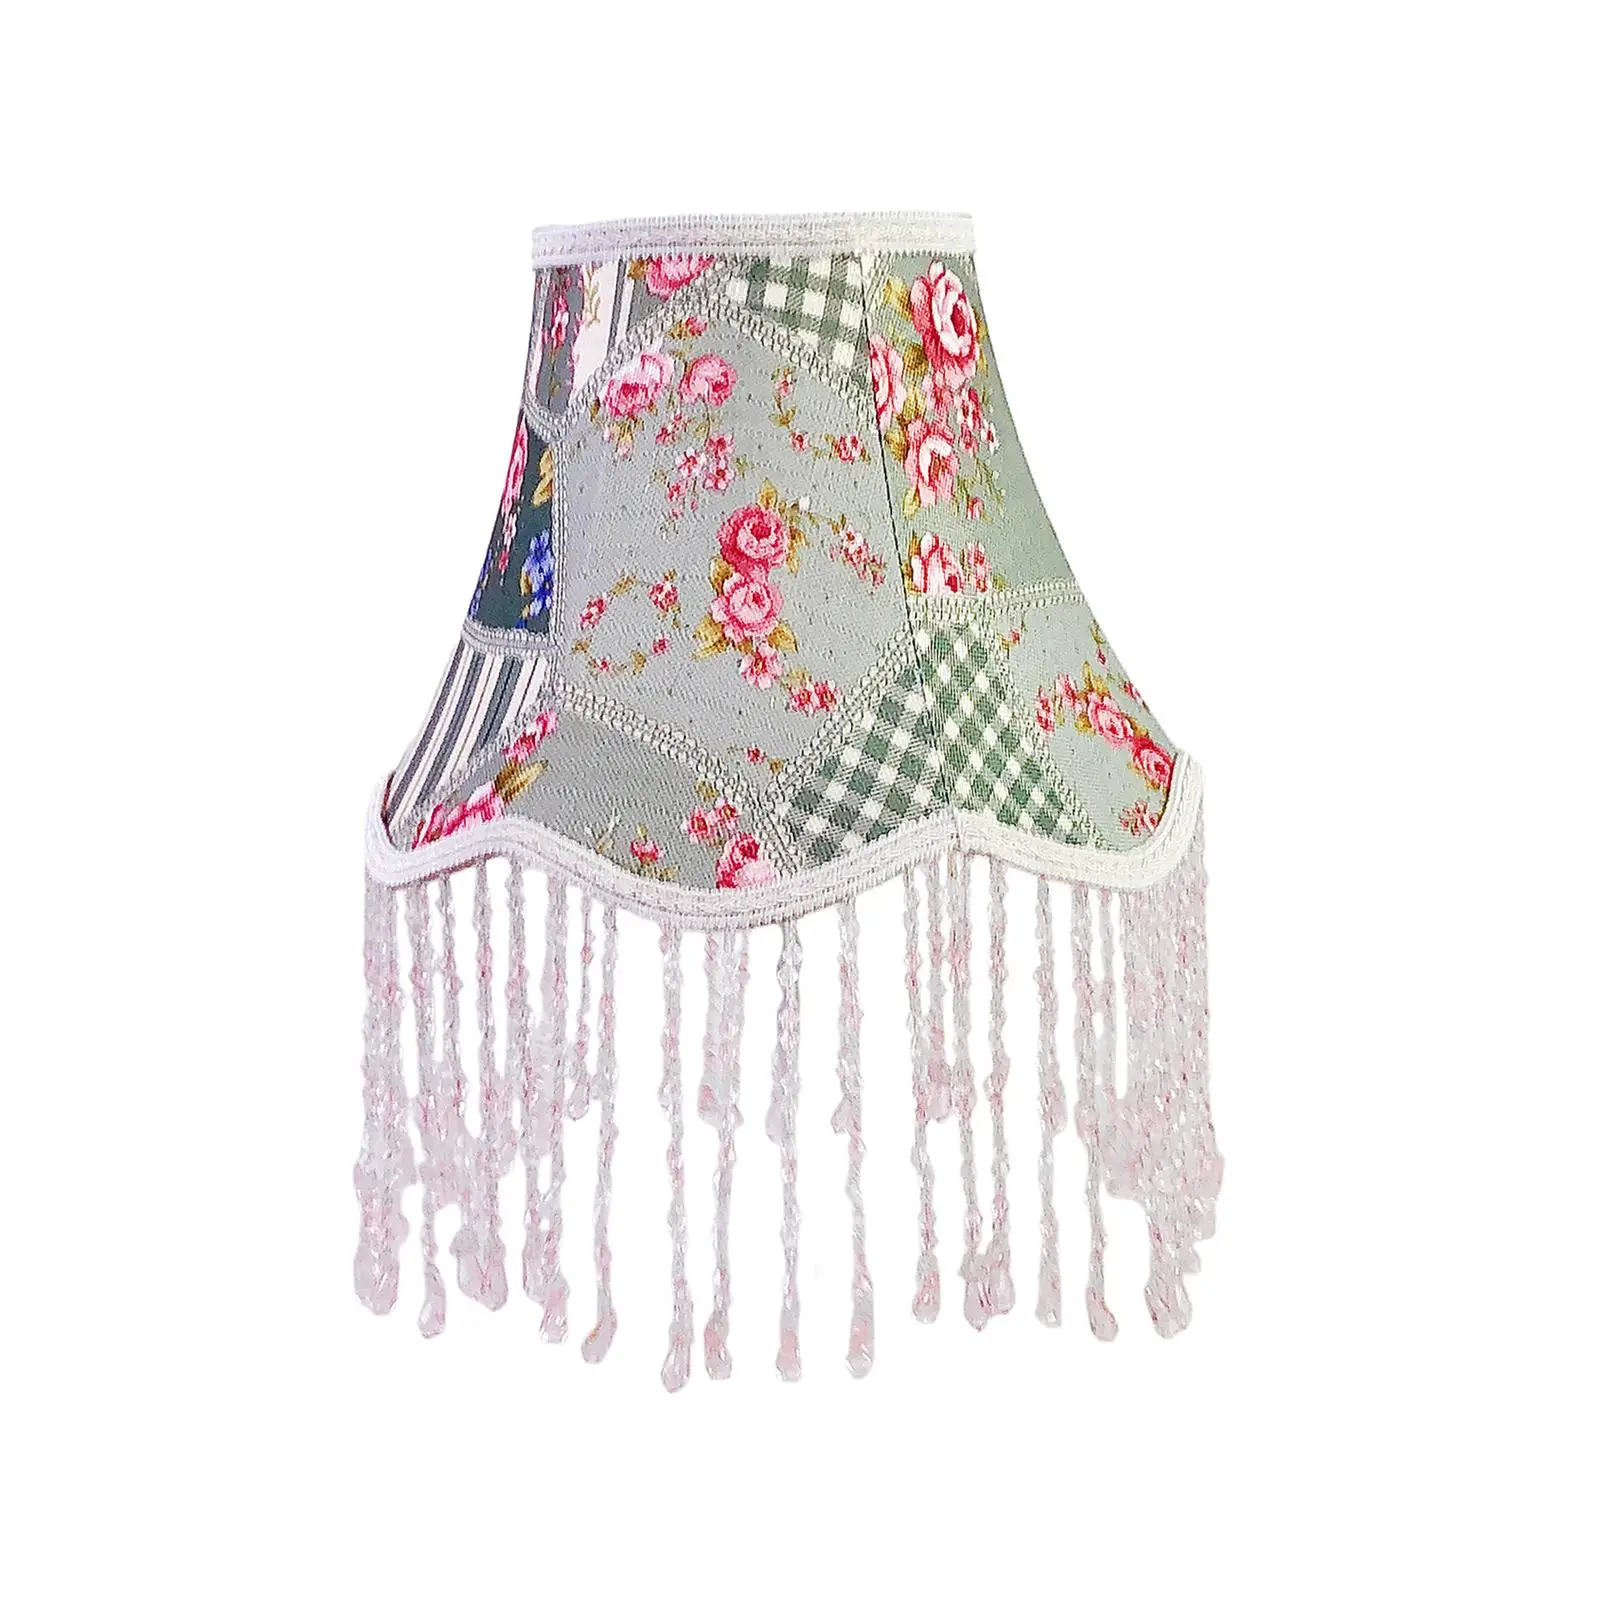 European Lampshade Vintage Fringe Beads Lamp Shade for Bedroom Cafe Home